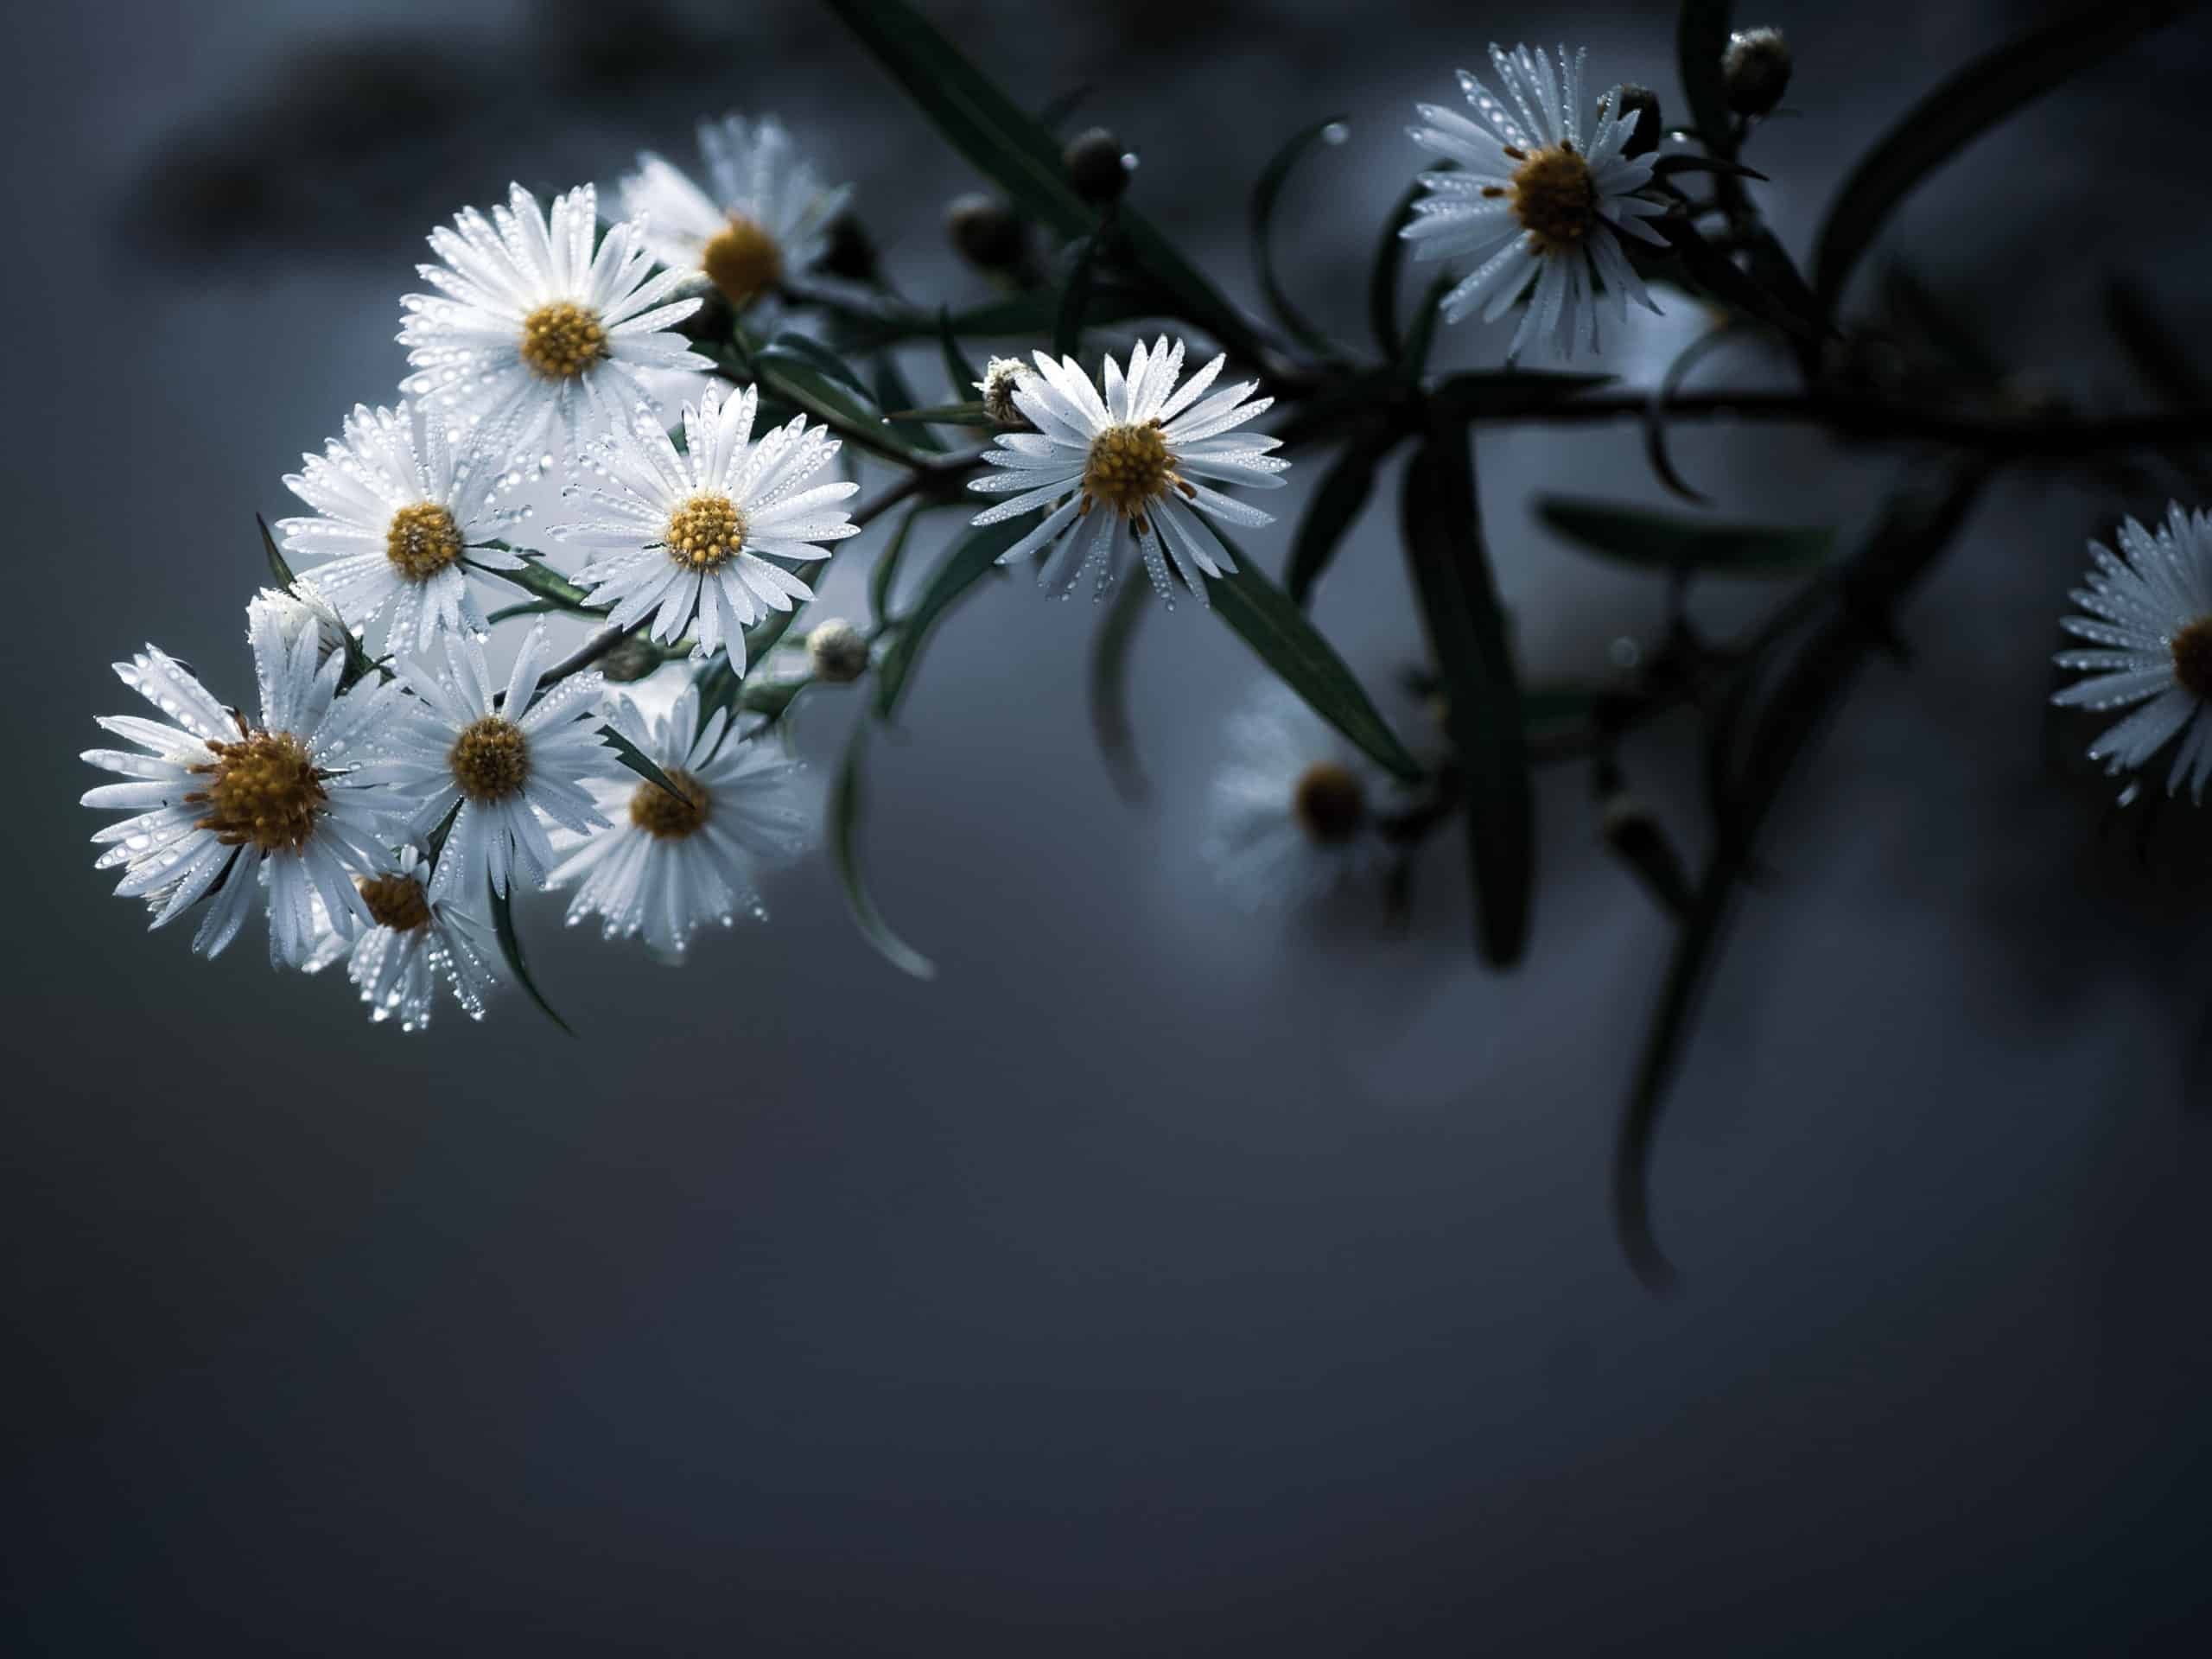 White daisies in gray background.